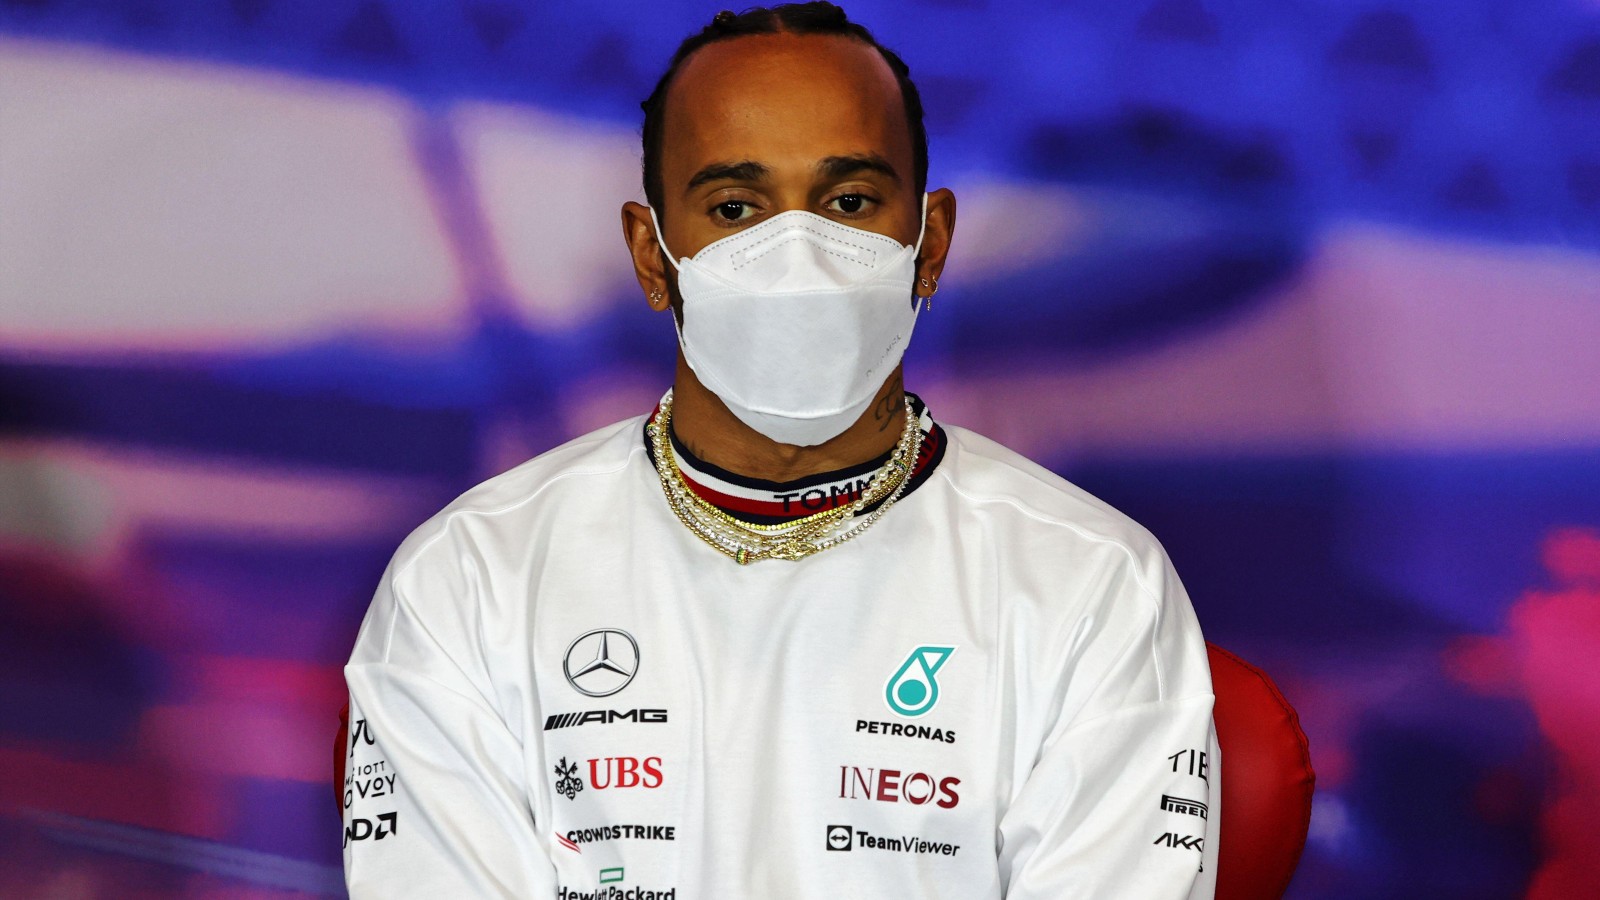 Lewis Hamilton, Mercedes, wearing a mask at Silverstone. England, June 2022.